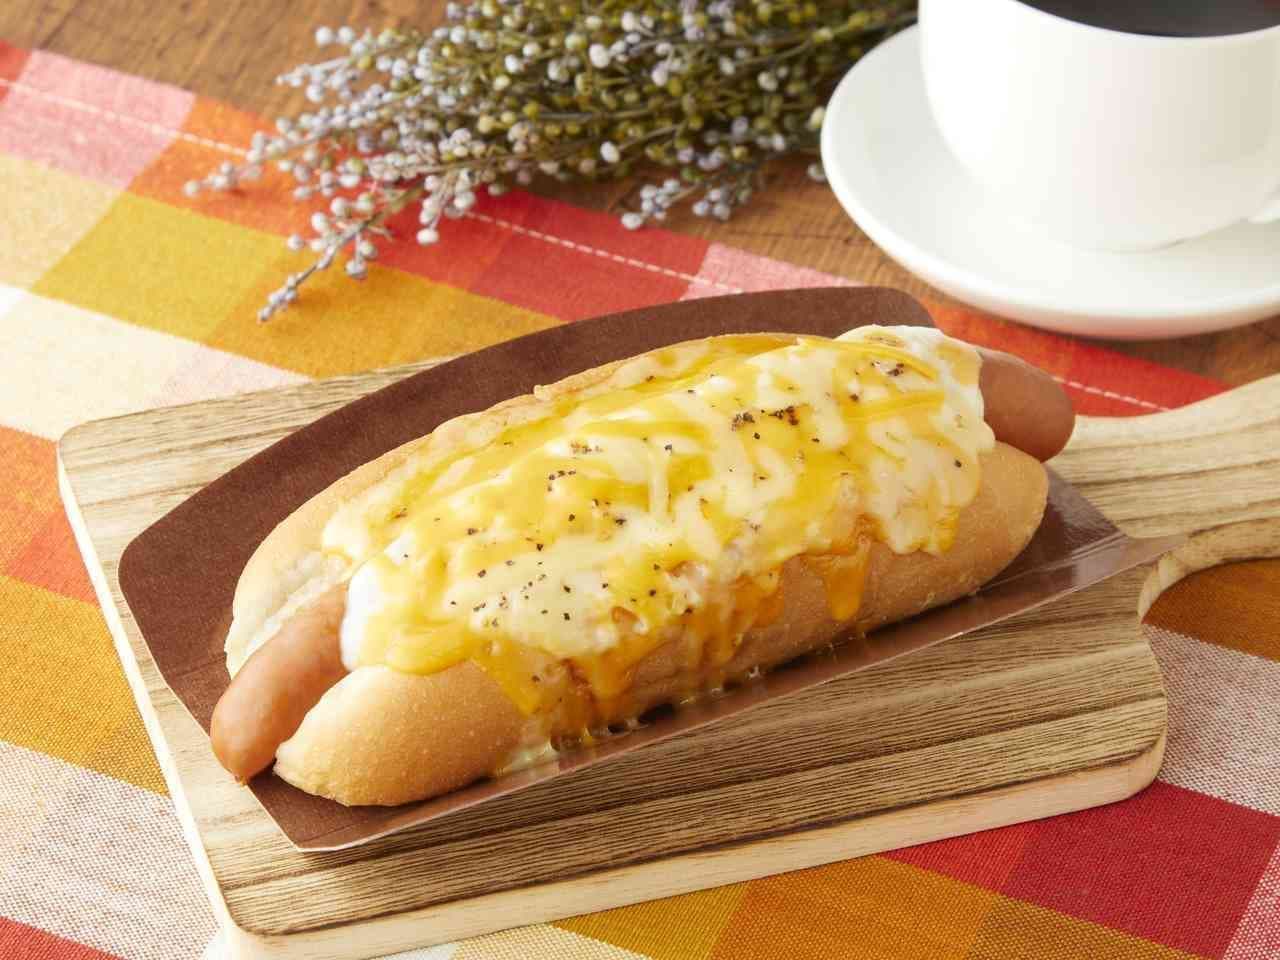 Ministop "Spilled Cheese Dog".